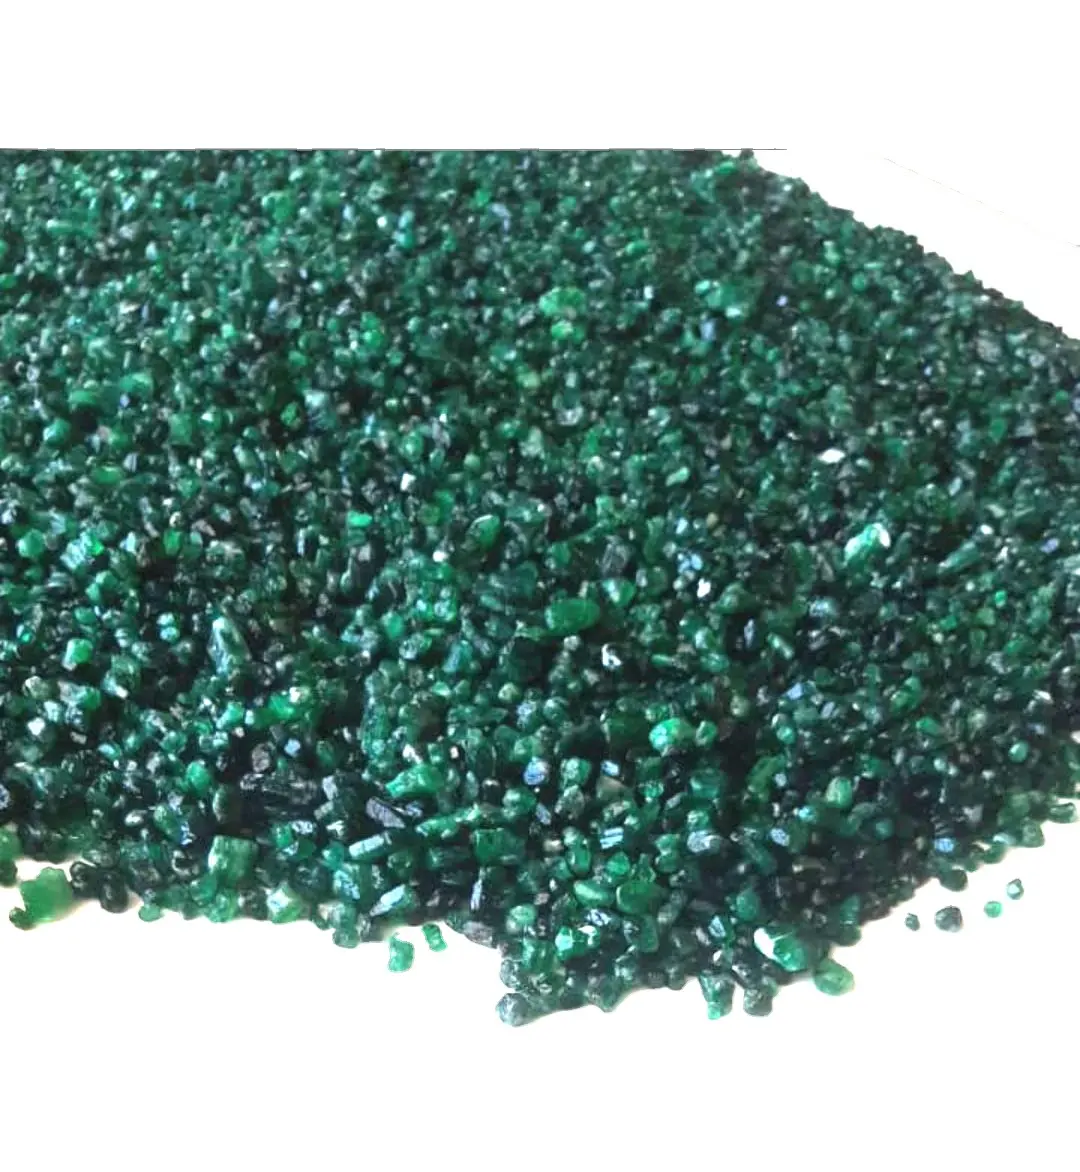 Wholesale Supplier Natural Emerald Raw Stones Uncut Stones Rough For Carving Gems Jewelry Raw